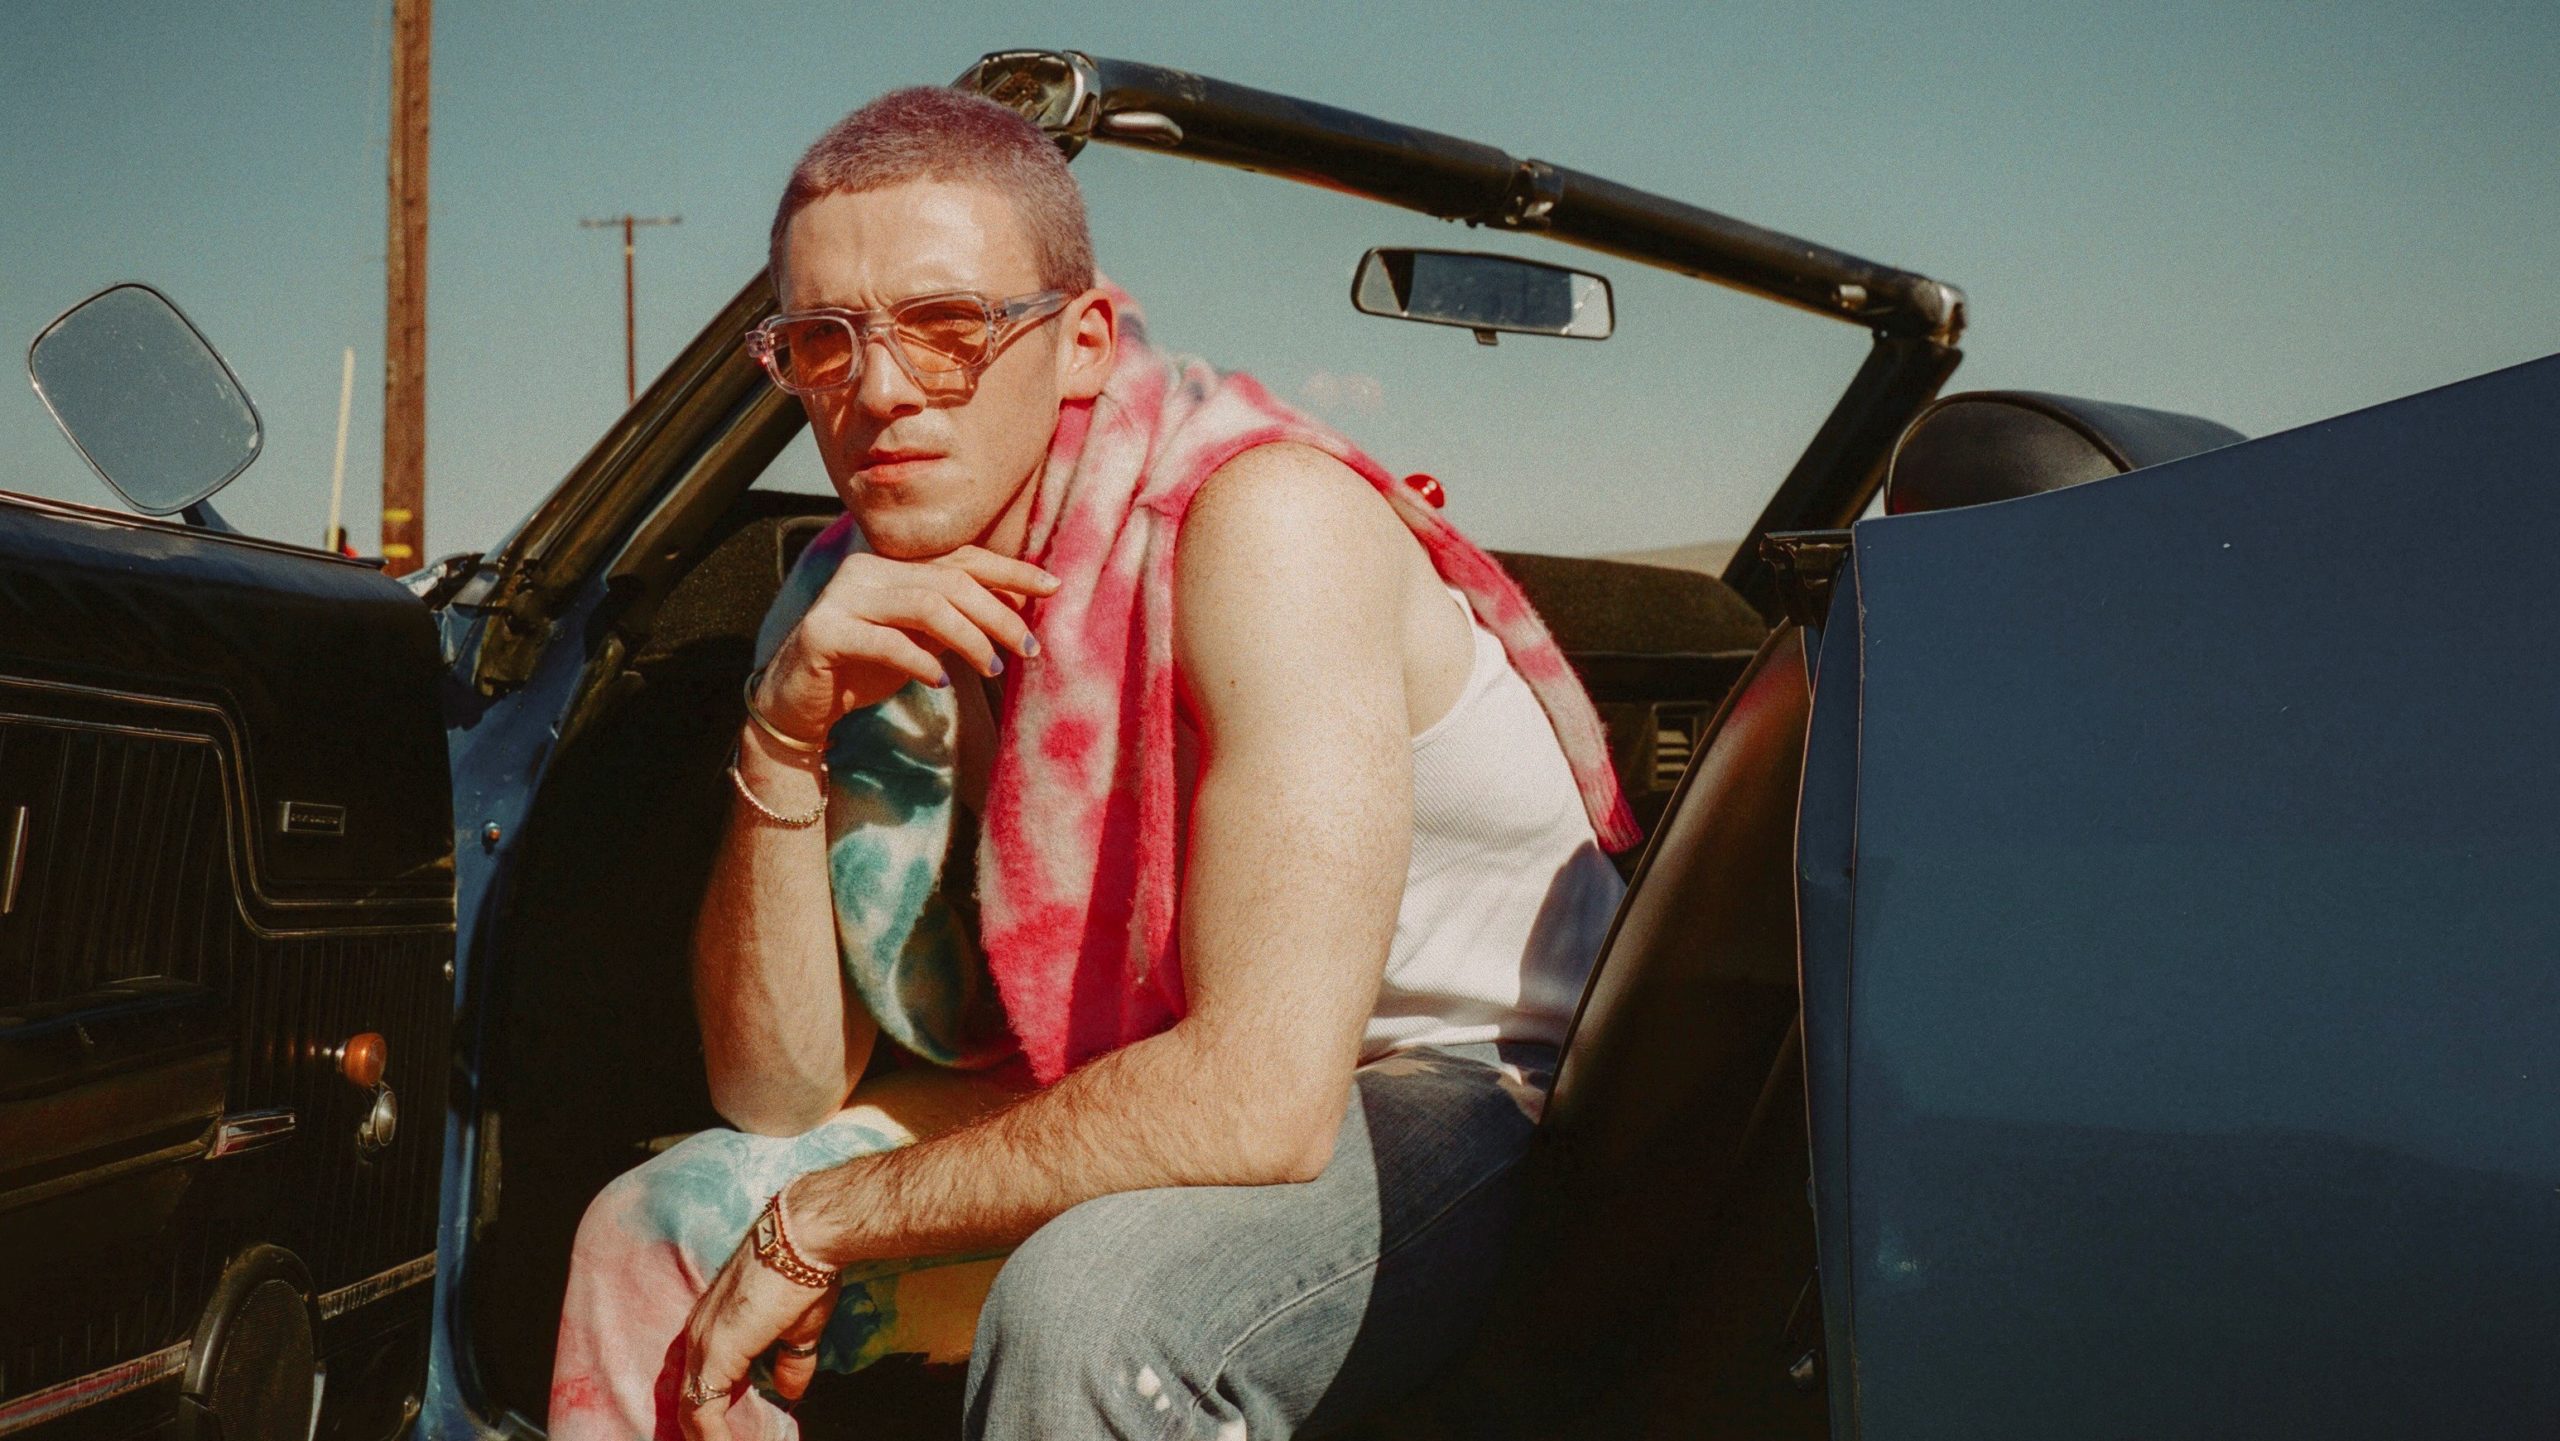 Man sits in convertible car with open door wearing a bright pink scarf and sunglasses